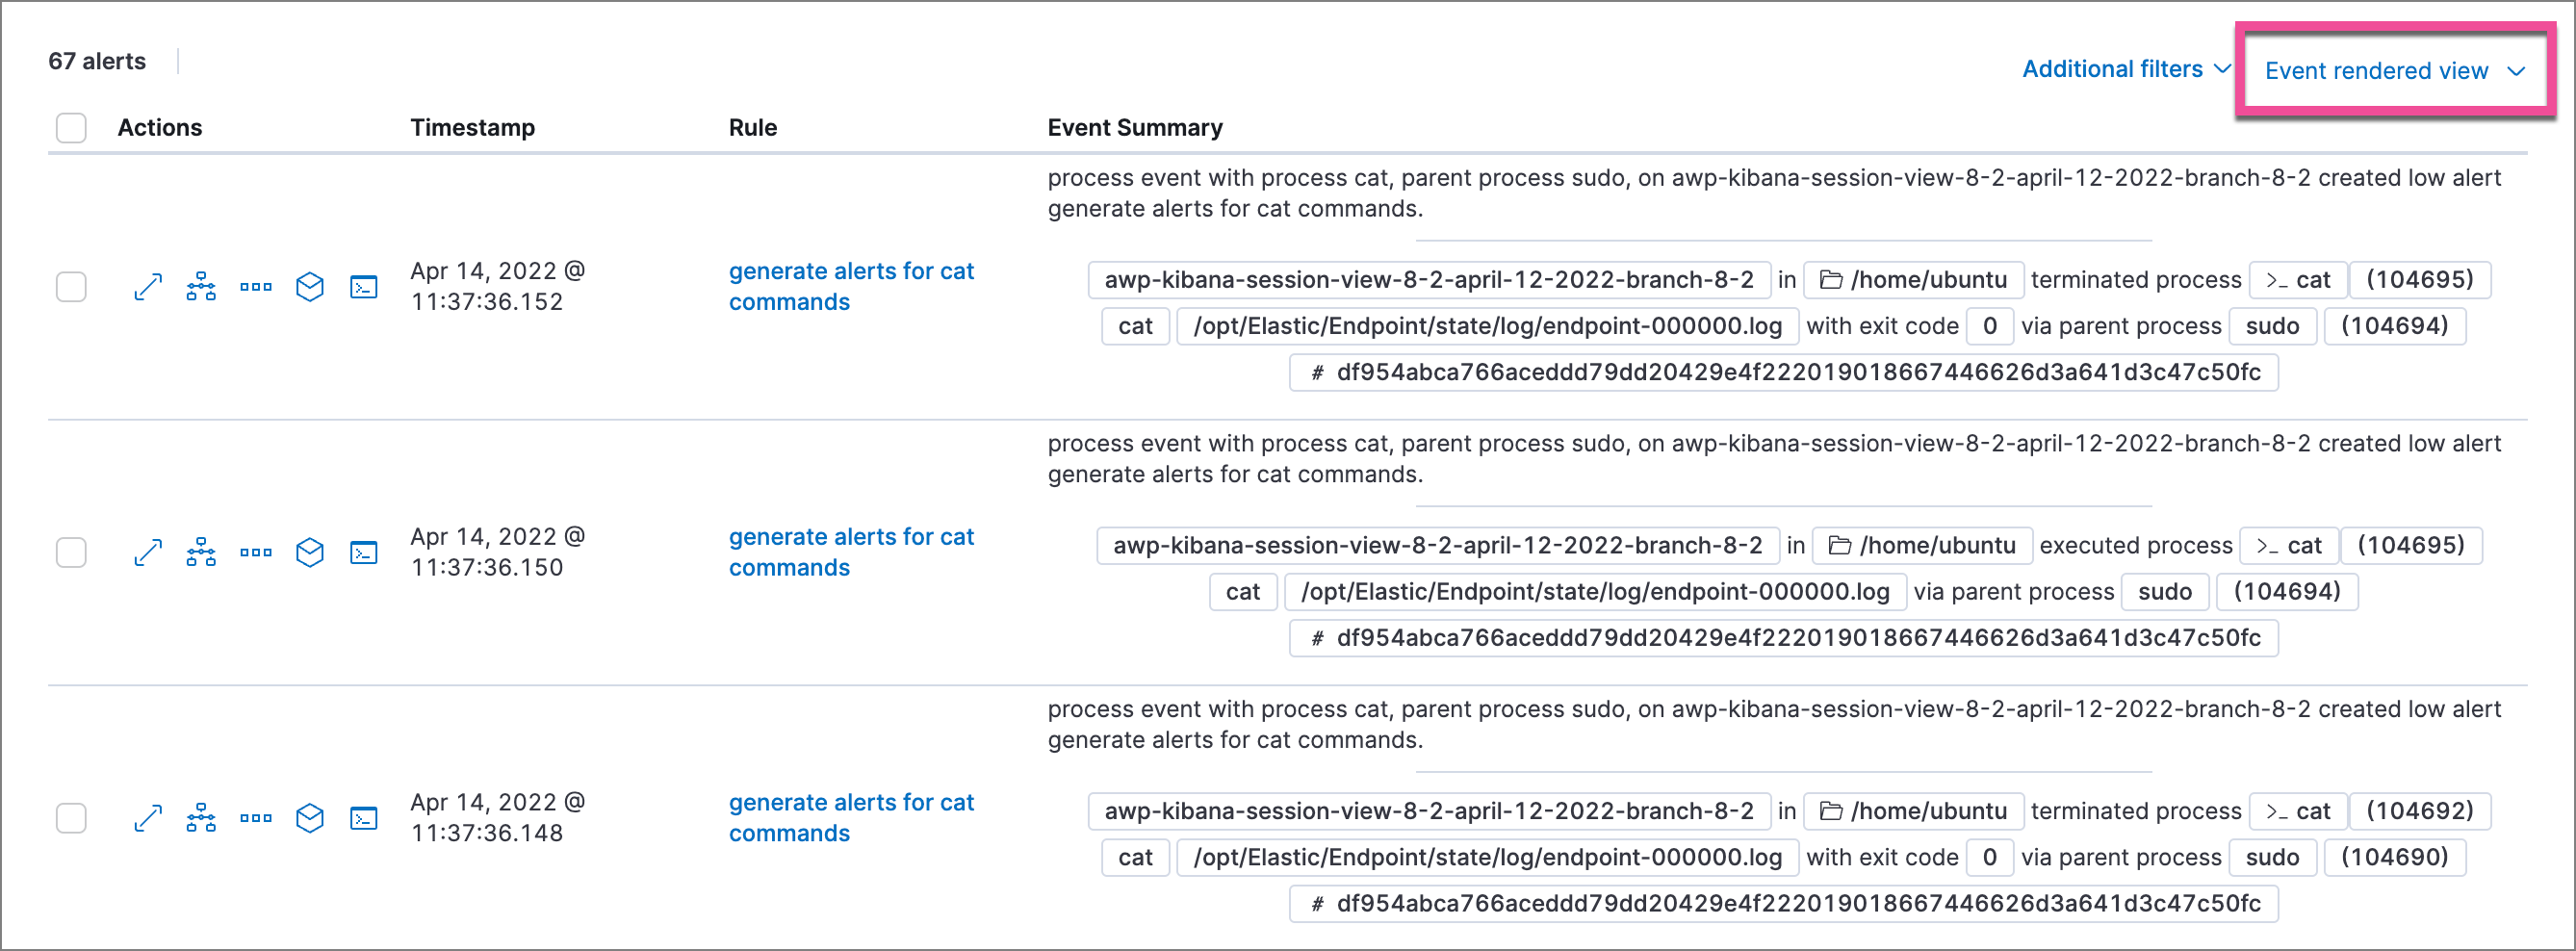 Alerts table with the Event rendered view enabled